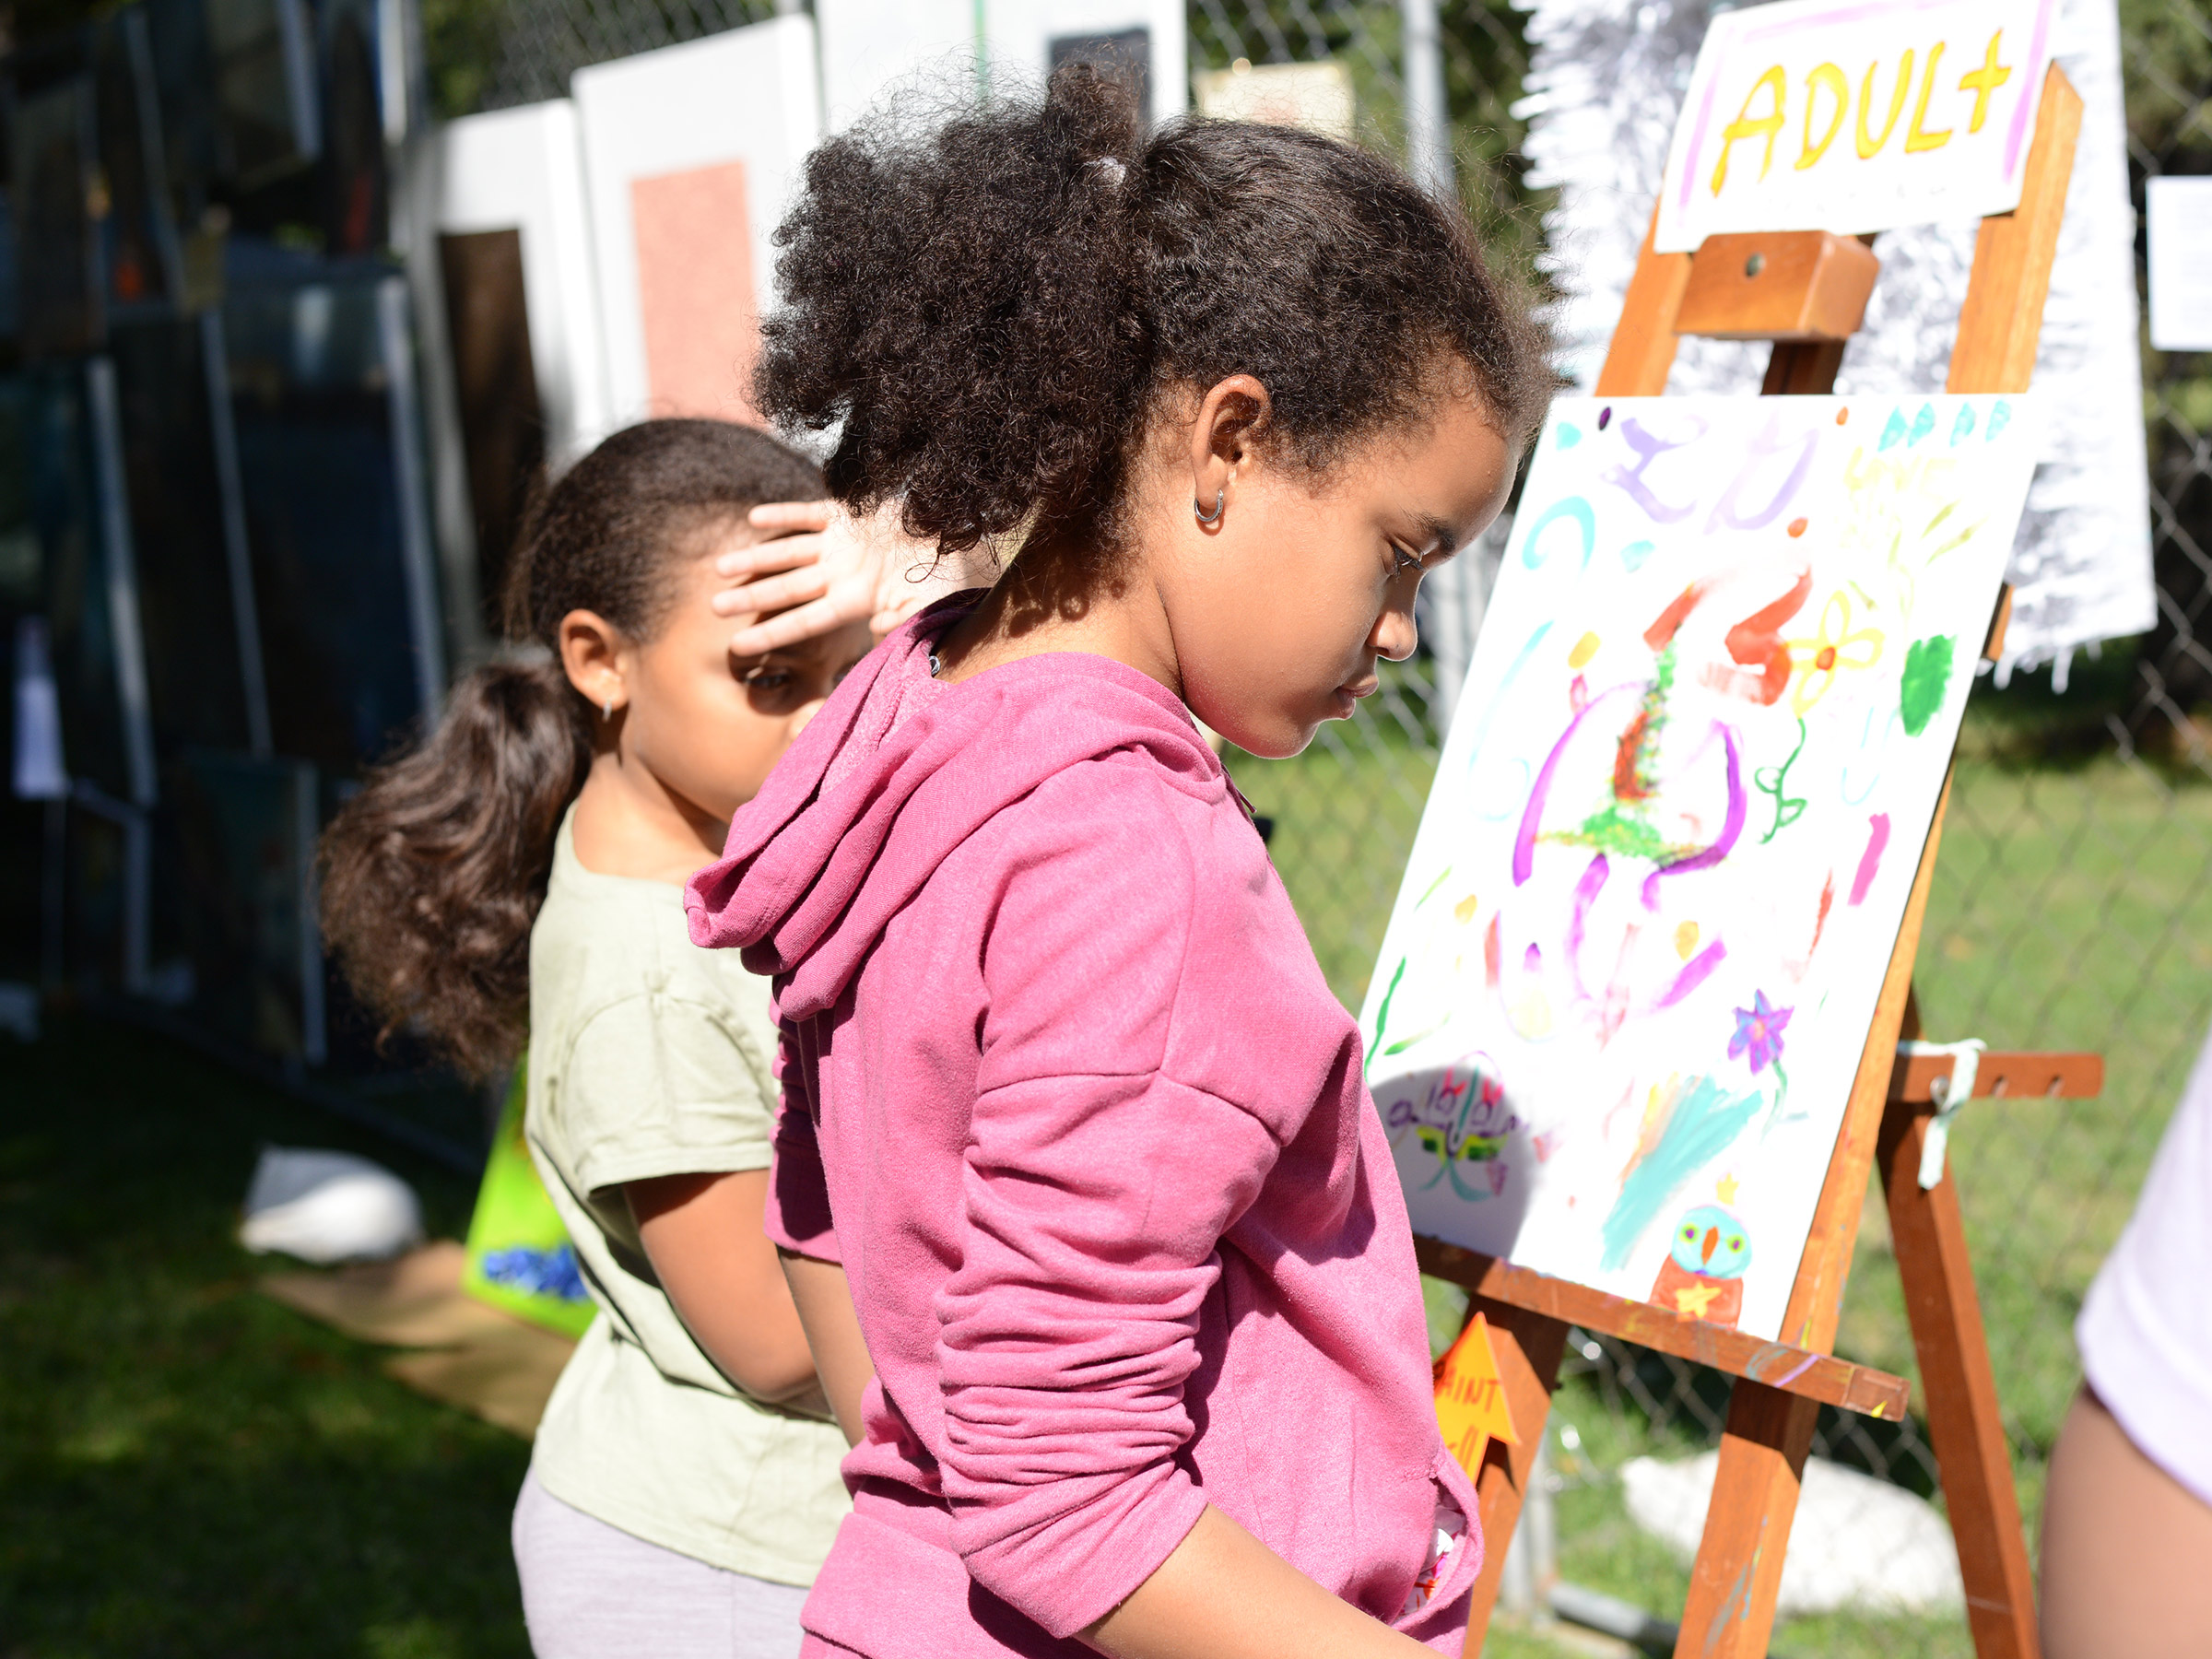 Two young girls painting outdoors on an easel.